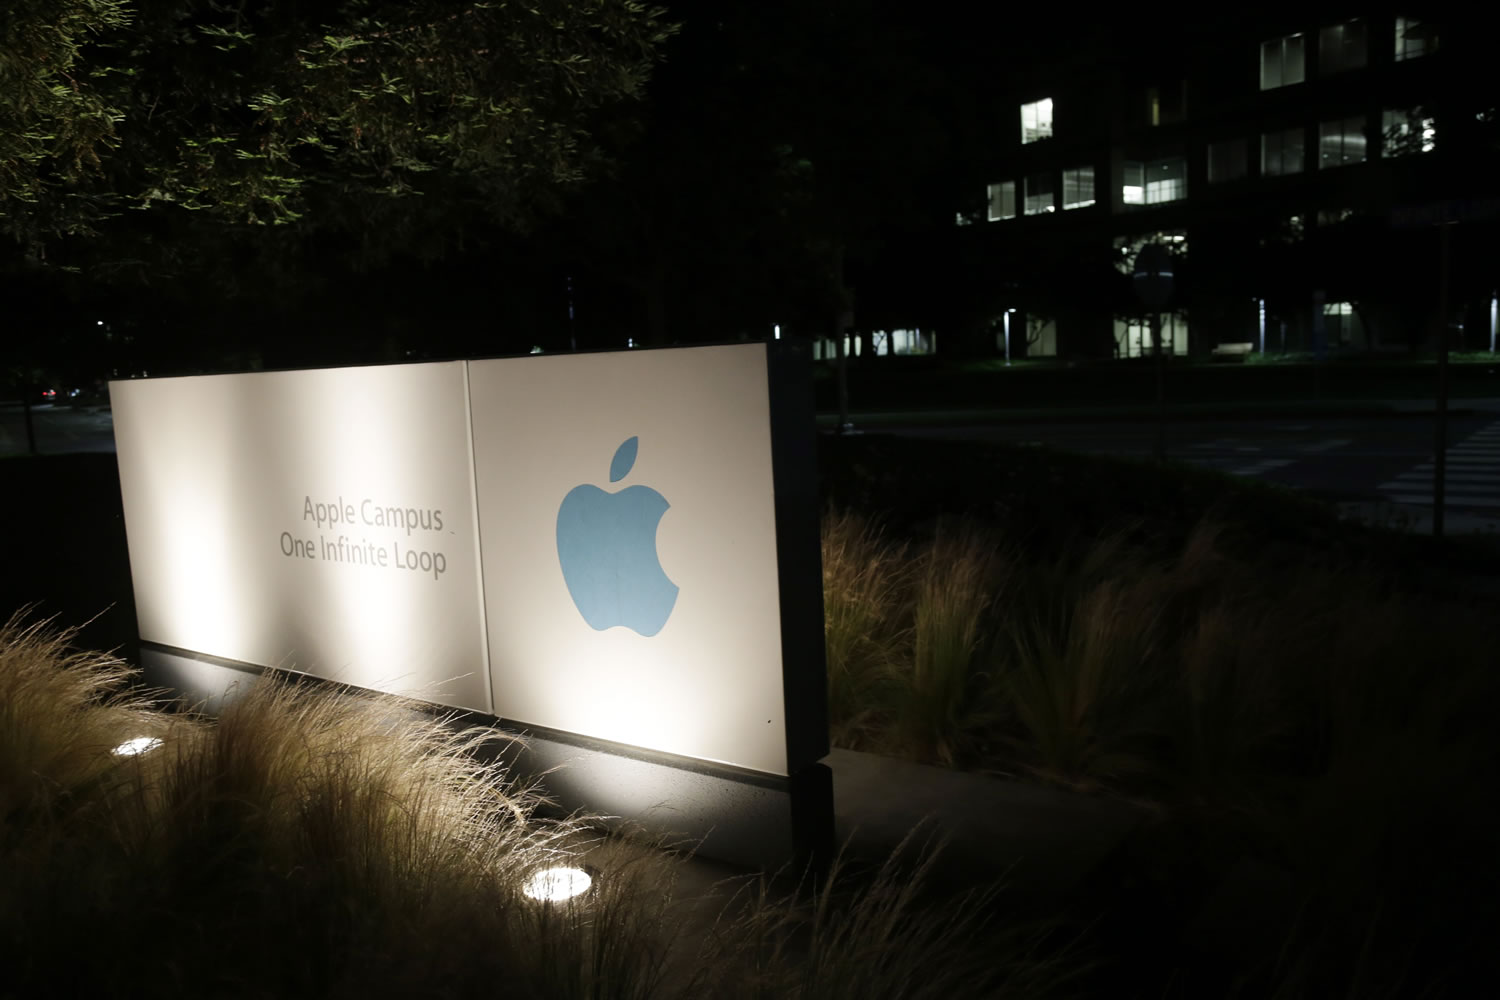 FILE - In a Friday, June 7, 2013 file photo, a sign displays the Apple logo outside of the company's headquarters in Cupertino, Calif. A federal judge ruled Wednesday, July 10, 2013 that Apple Inc. broke antitrust laws and conspired with publishers to raise electronic book prices, citing &quot;compelling evidence&quot; from the words of the late Steve Jobs. U.S. District Judge Denise Cote said Apple knew that no publisher could risk acting alone to try to eliminate Amazon.com's $9.99 price for the most popular e-books so it &quot;created a mechanism and environment that enabled them to act together in a matter of weeks to eliminate all retail price competition for their e-books.&quot;Apple spokesman Tom Neumayr said the Cupertino, California-based company planned to appeal.